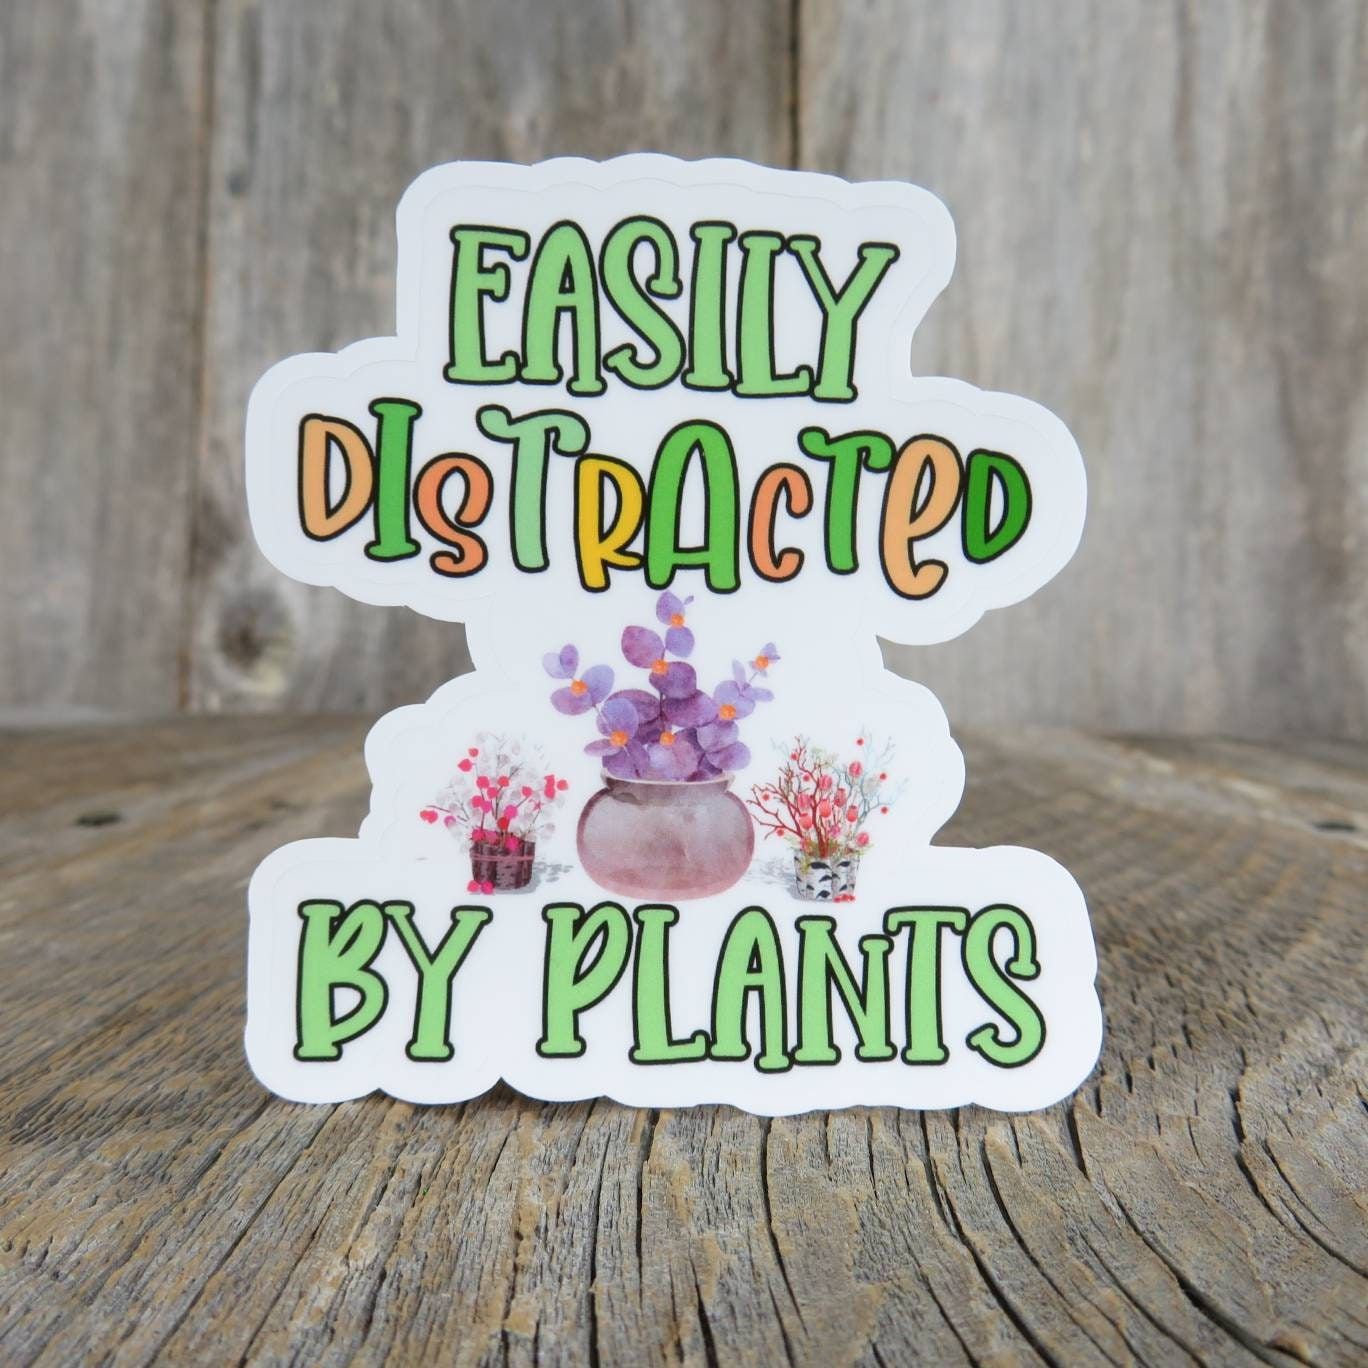 Easily Distracted by Plants Sticker Plant Addict Full Color Waterproof Funny Plant Lover